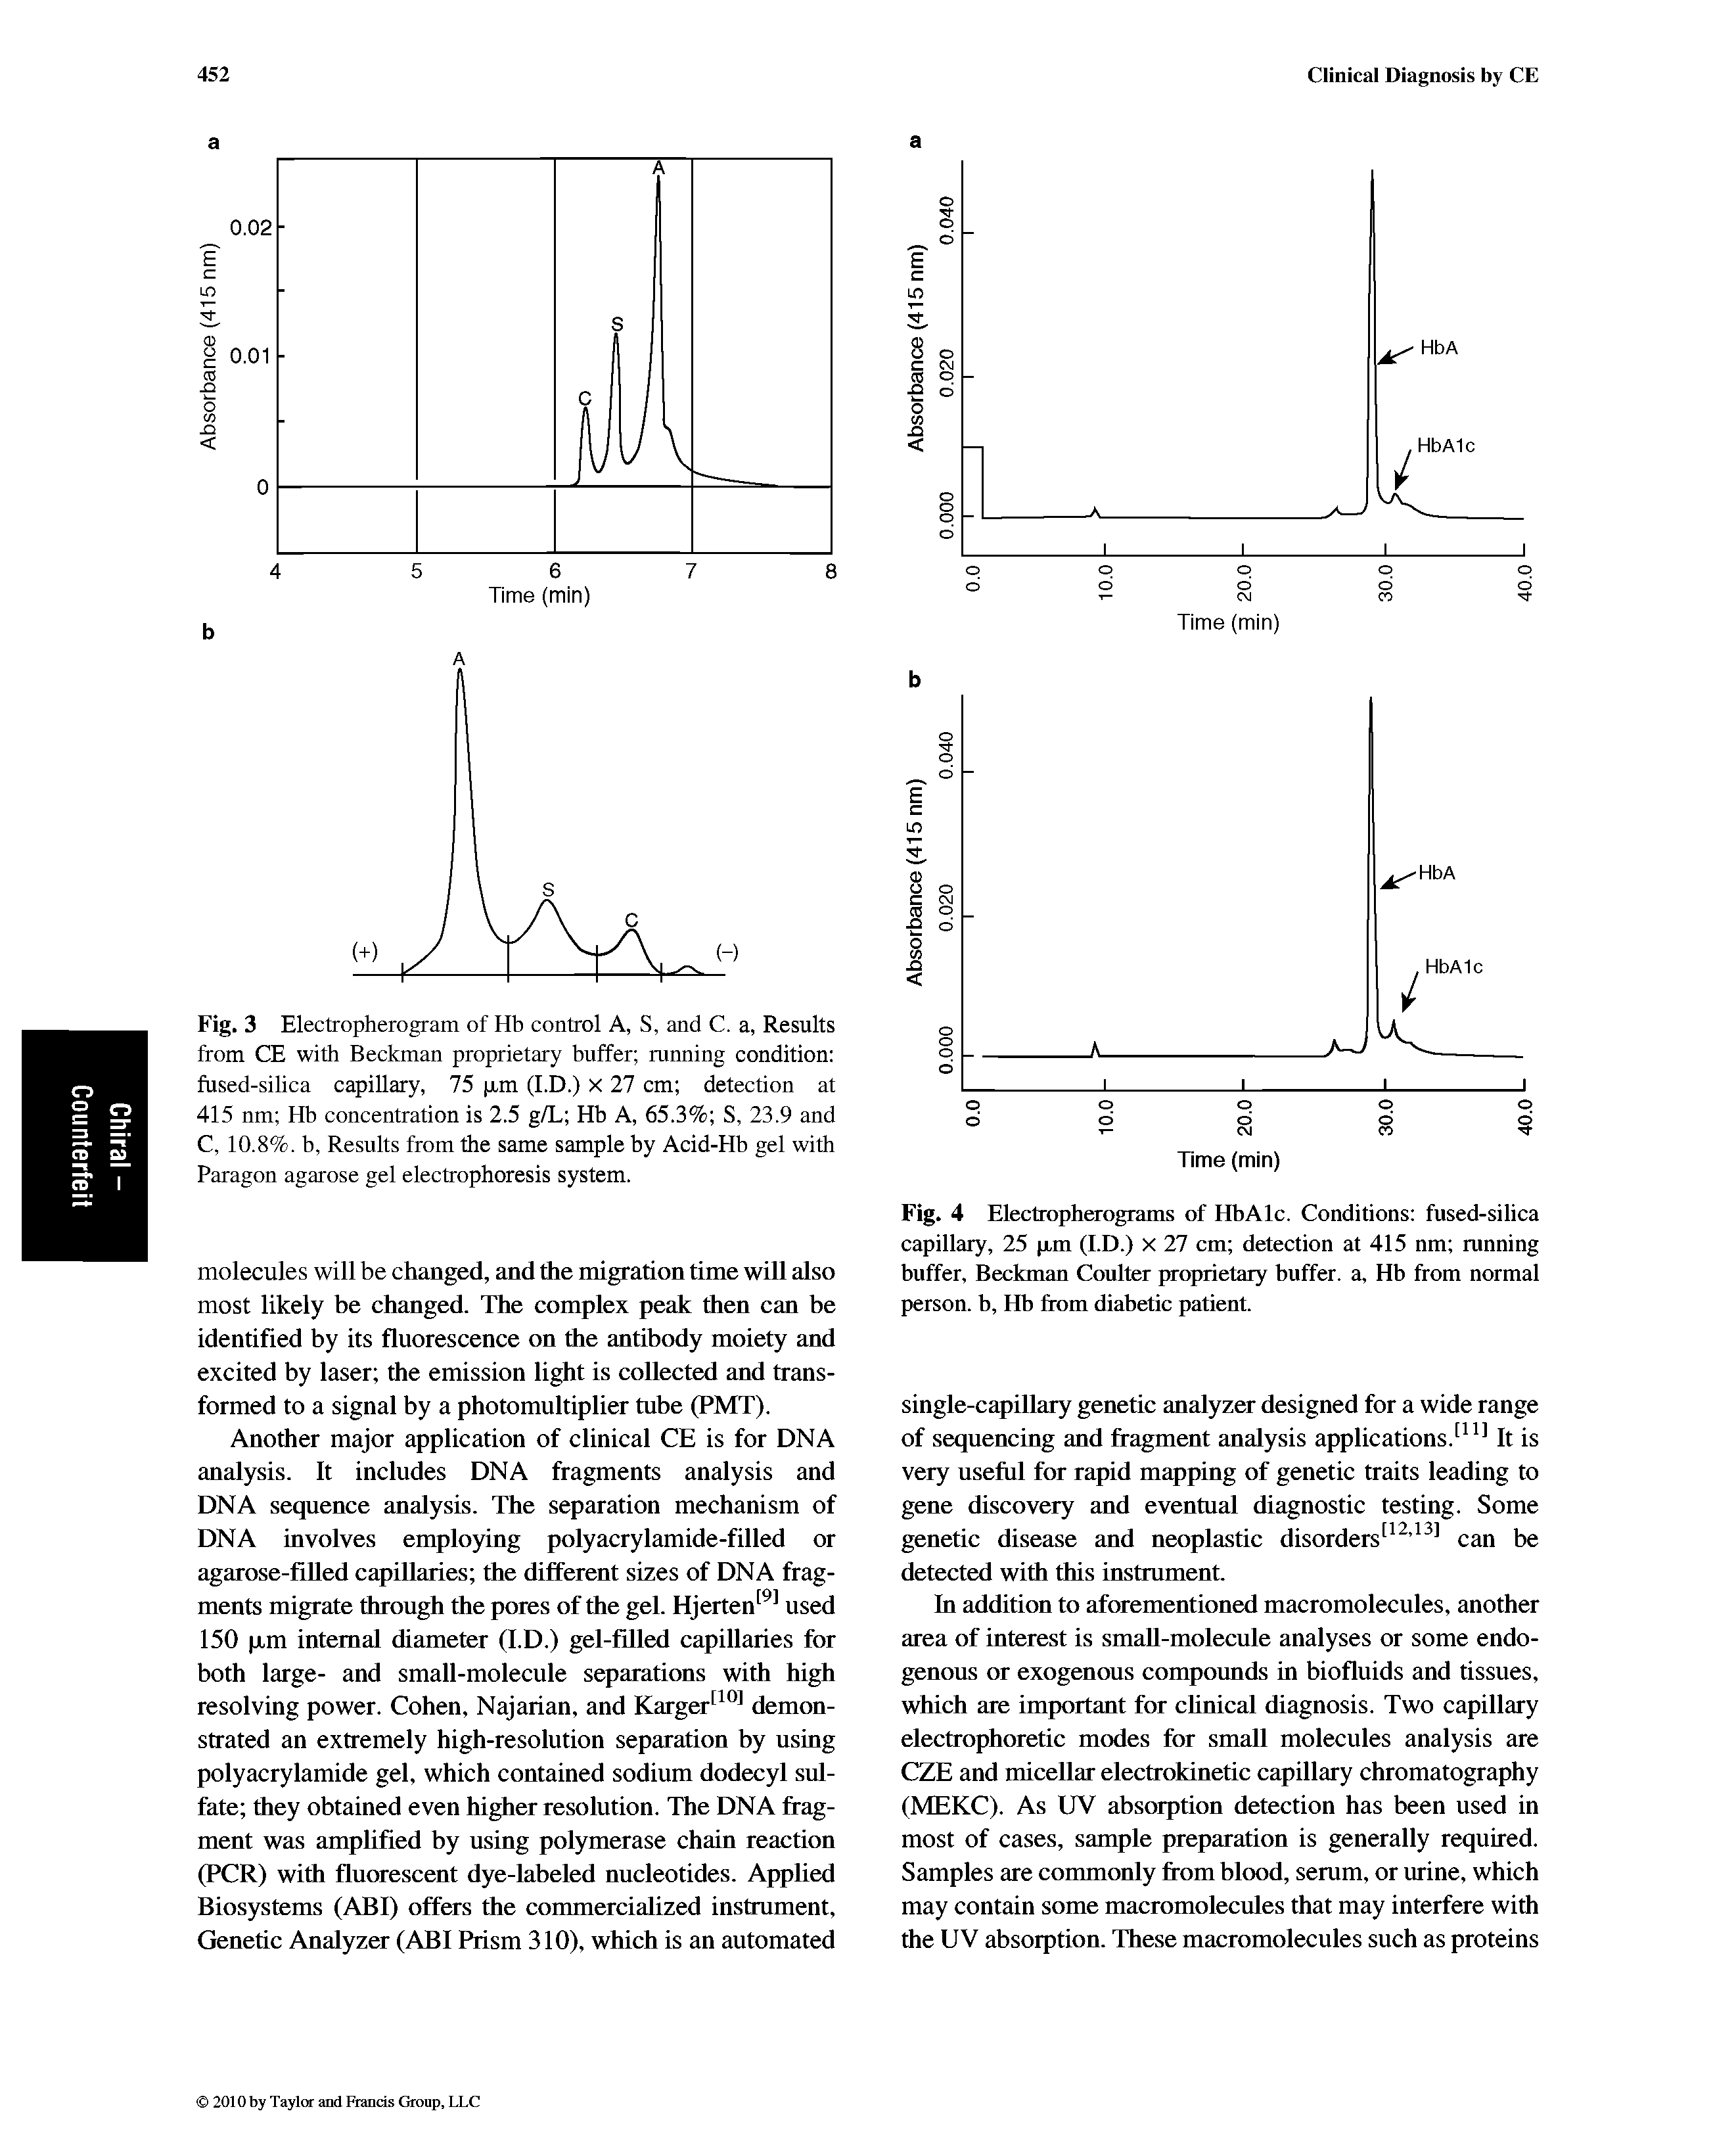 Fig. 3 Electropherogram of Hb control A, S, and C. a, Results from CE with Beckman proprietary buffer running condition fused-silica capillary, 75 p,m (I.D.) X 27 cm detection at 415 nm Hb concentration is 2.5 g/L Hb A, 65.3% S, 23.9 and C, 10.8%. b, Results from the same sample by Acid-Hb gel with Paragon agarose gel electrophoresis system.